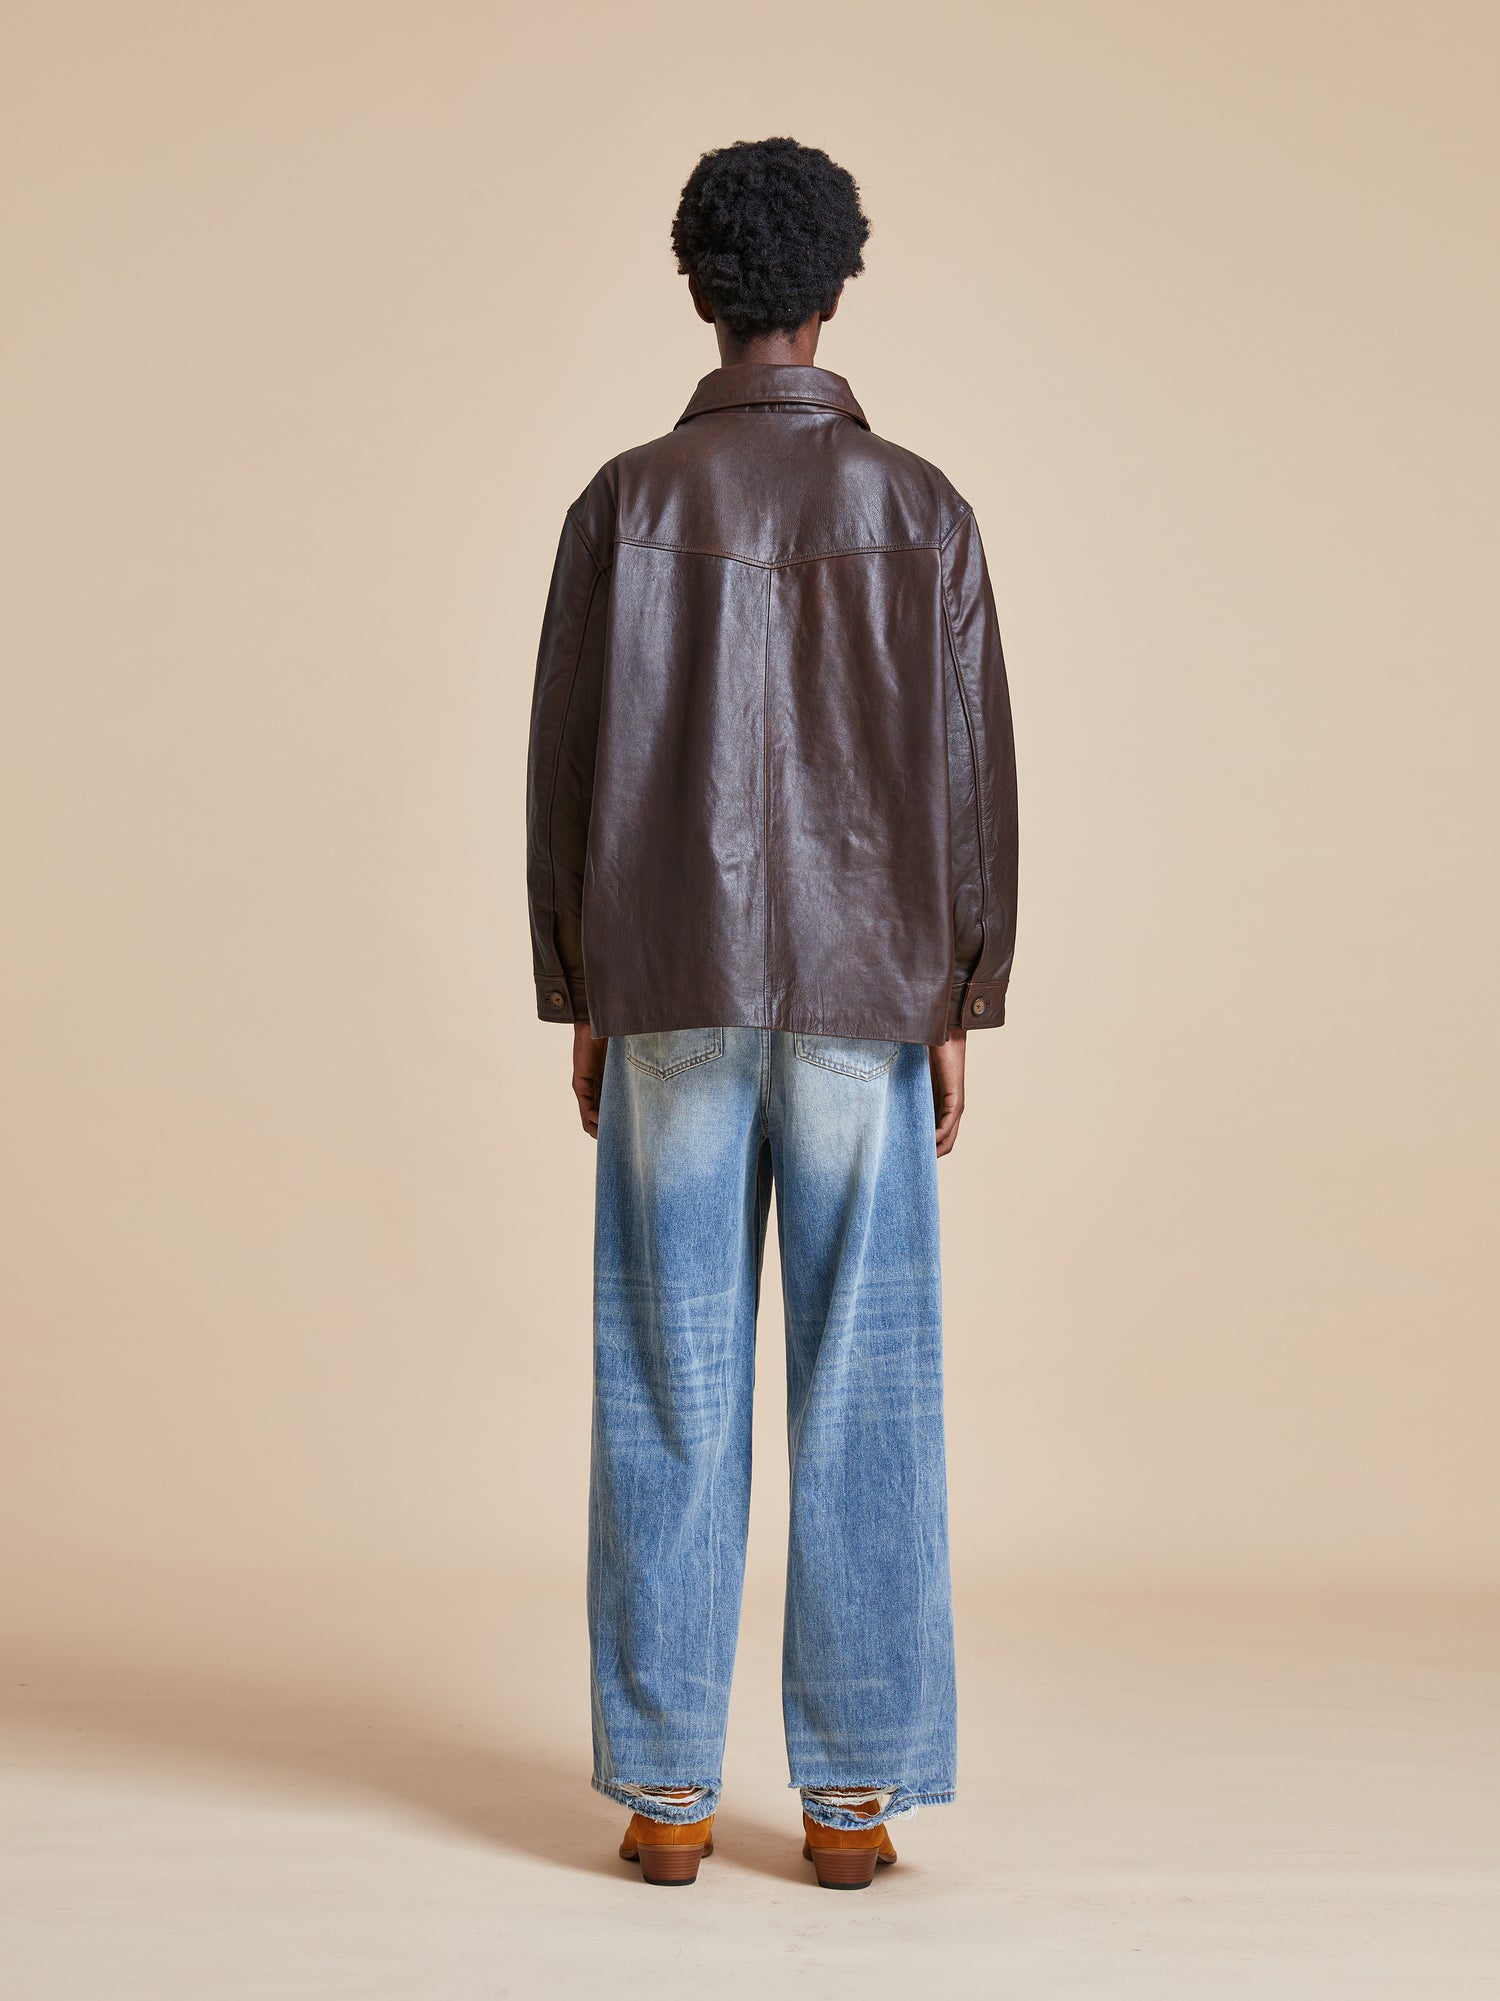 The back view of a man wearing a Found Sepia Leather Overshirt and jeans.